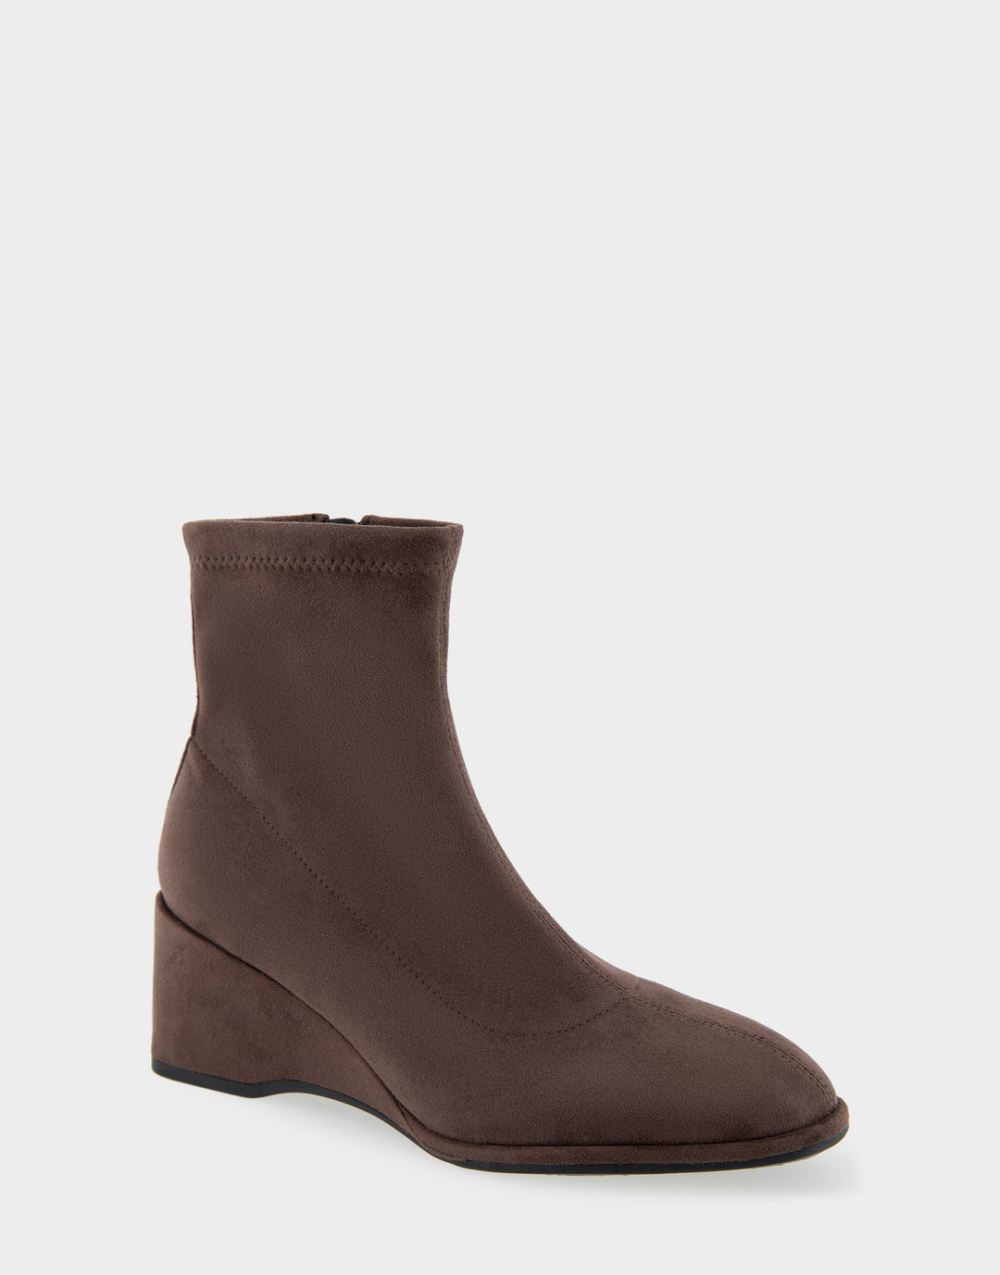 Women's | Anouk Java Faux Suede Wedge Heel Ankle Boot